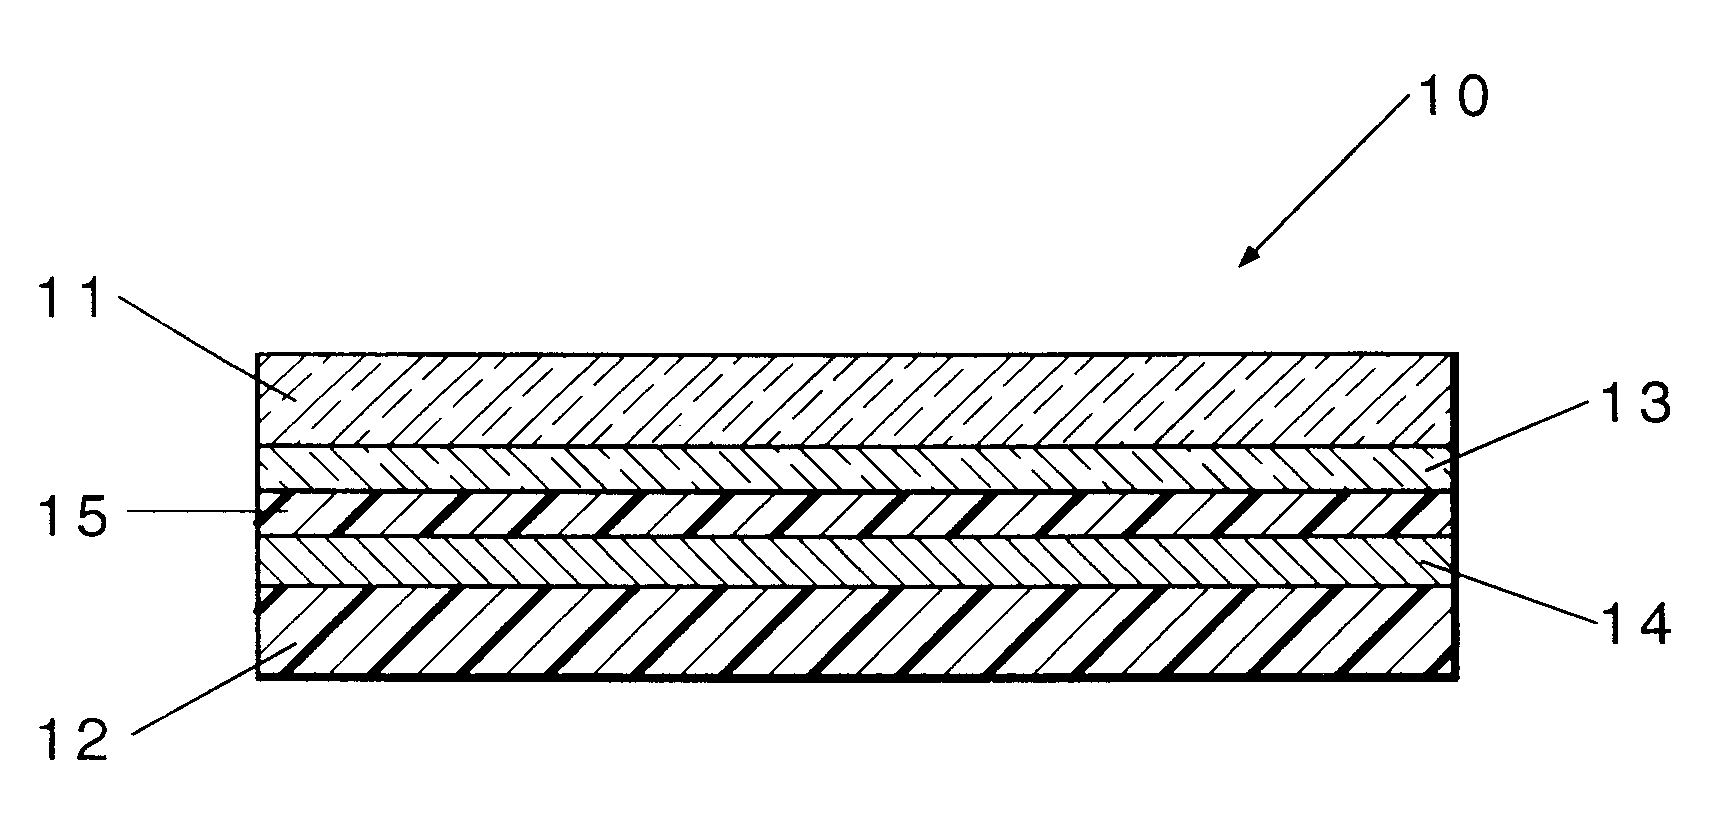 Electrochromic display device and compositions useful in making such devices